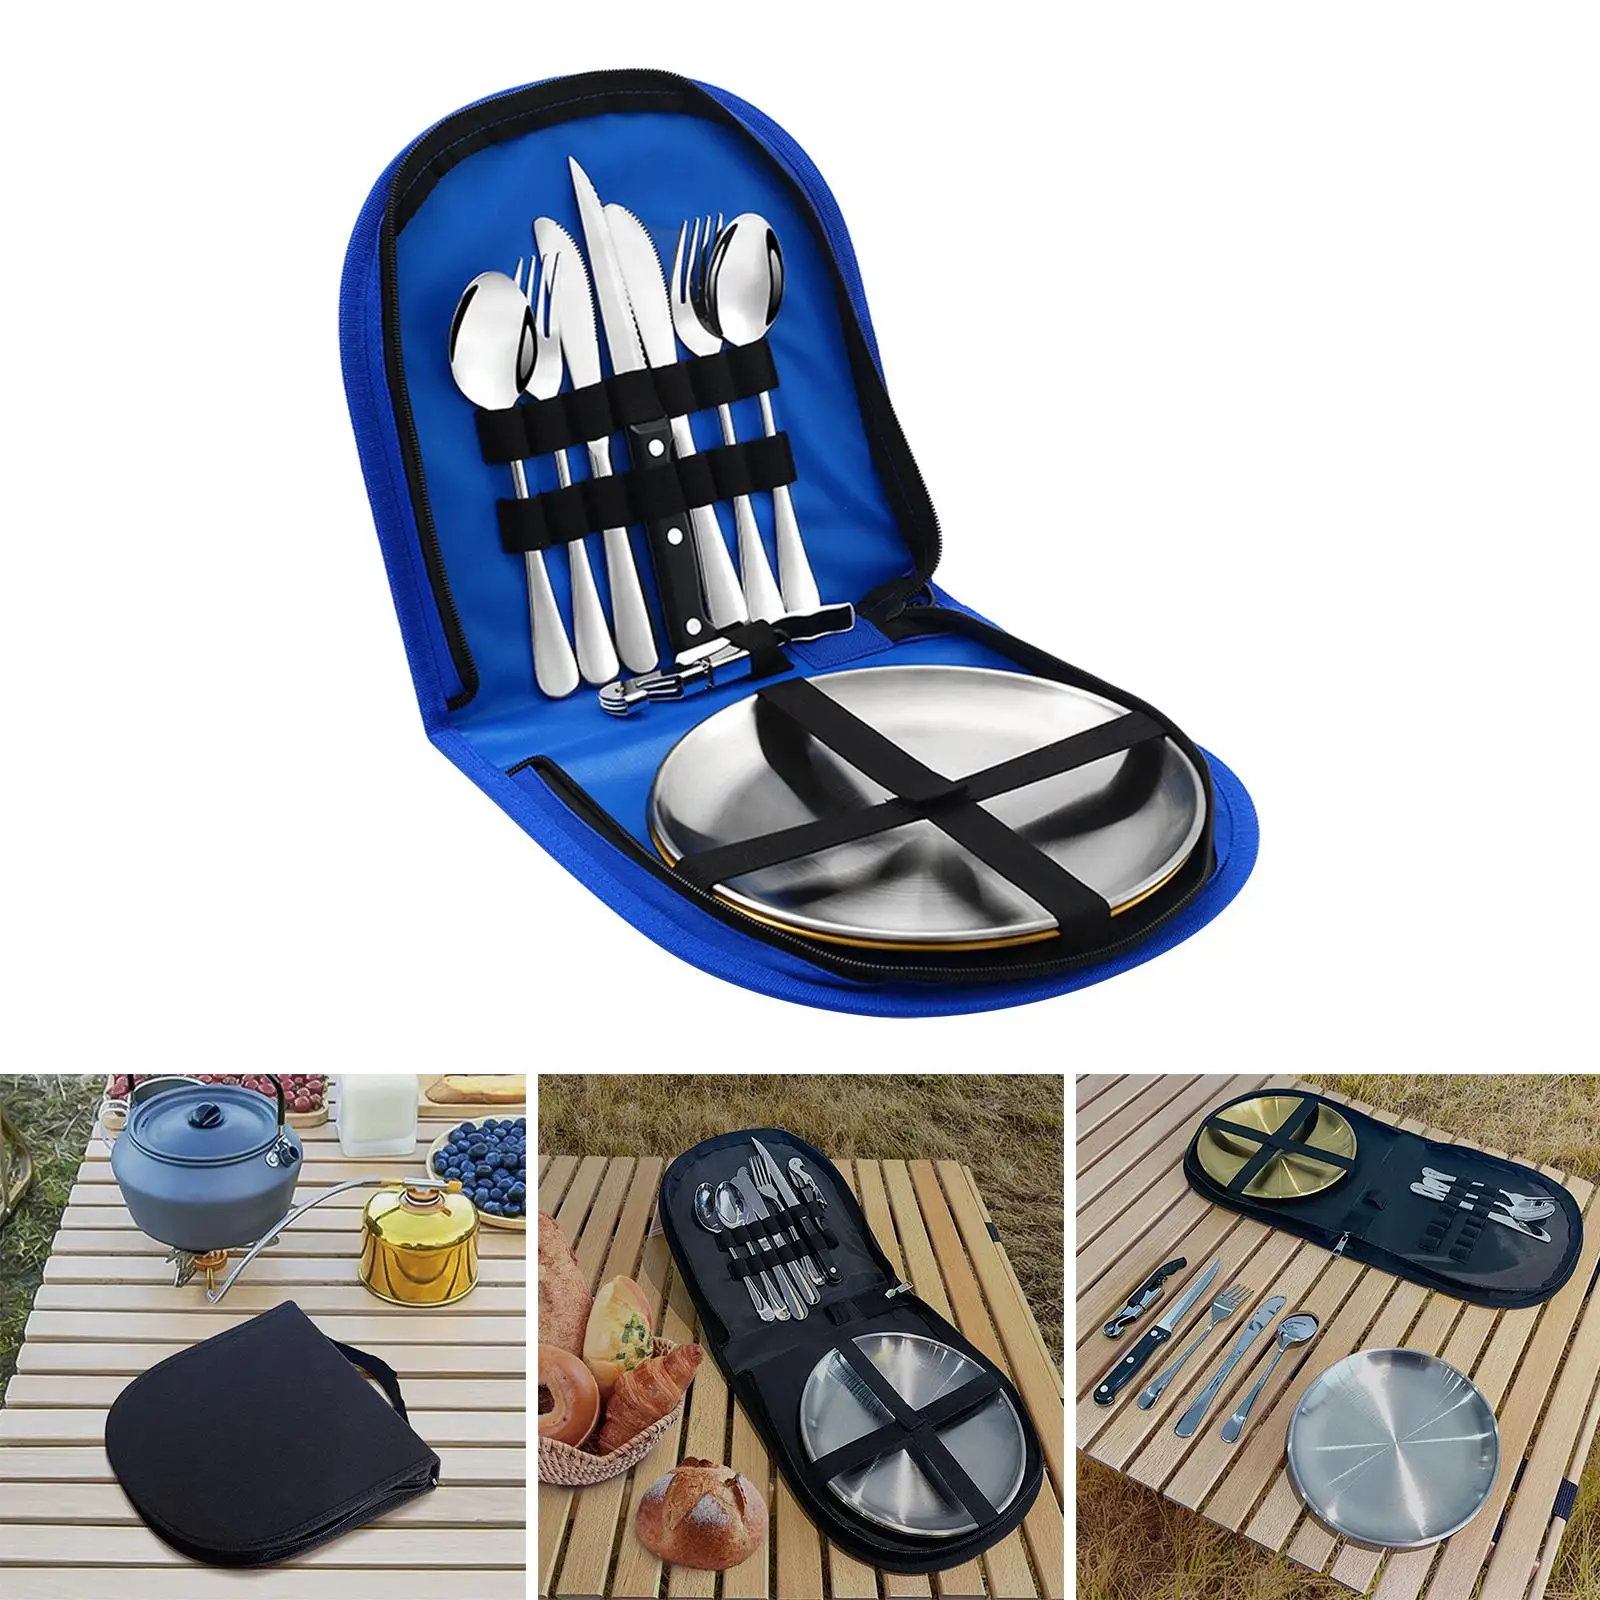 10 Pieces Stainless Steel Picnic Family Cutlery Set Travel Camping Utensil Includes Forks Spoons Knifes Dish for Hiking Barbecue